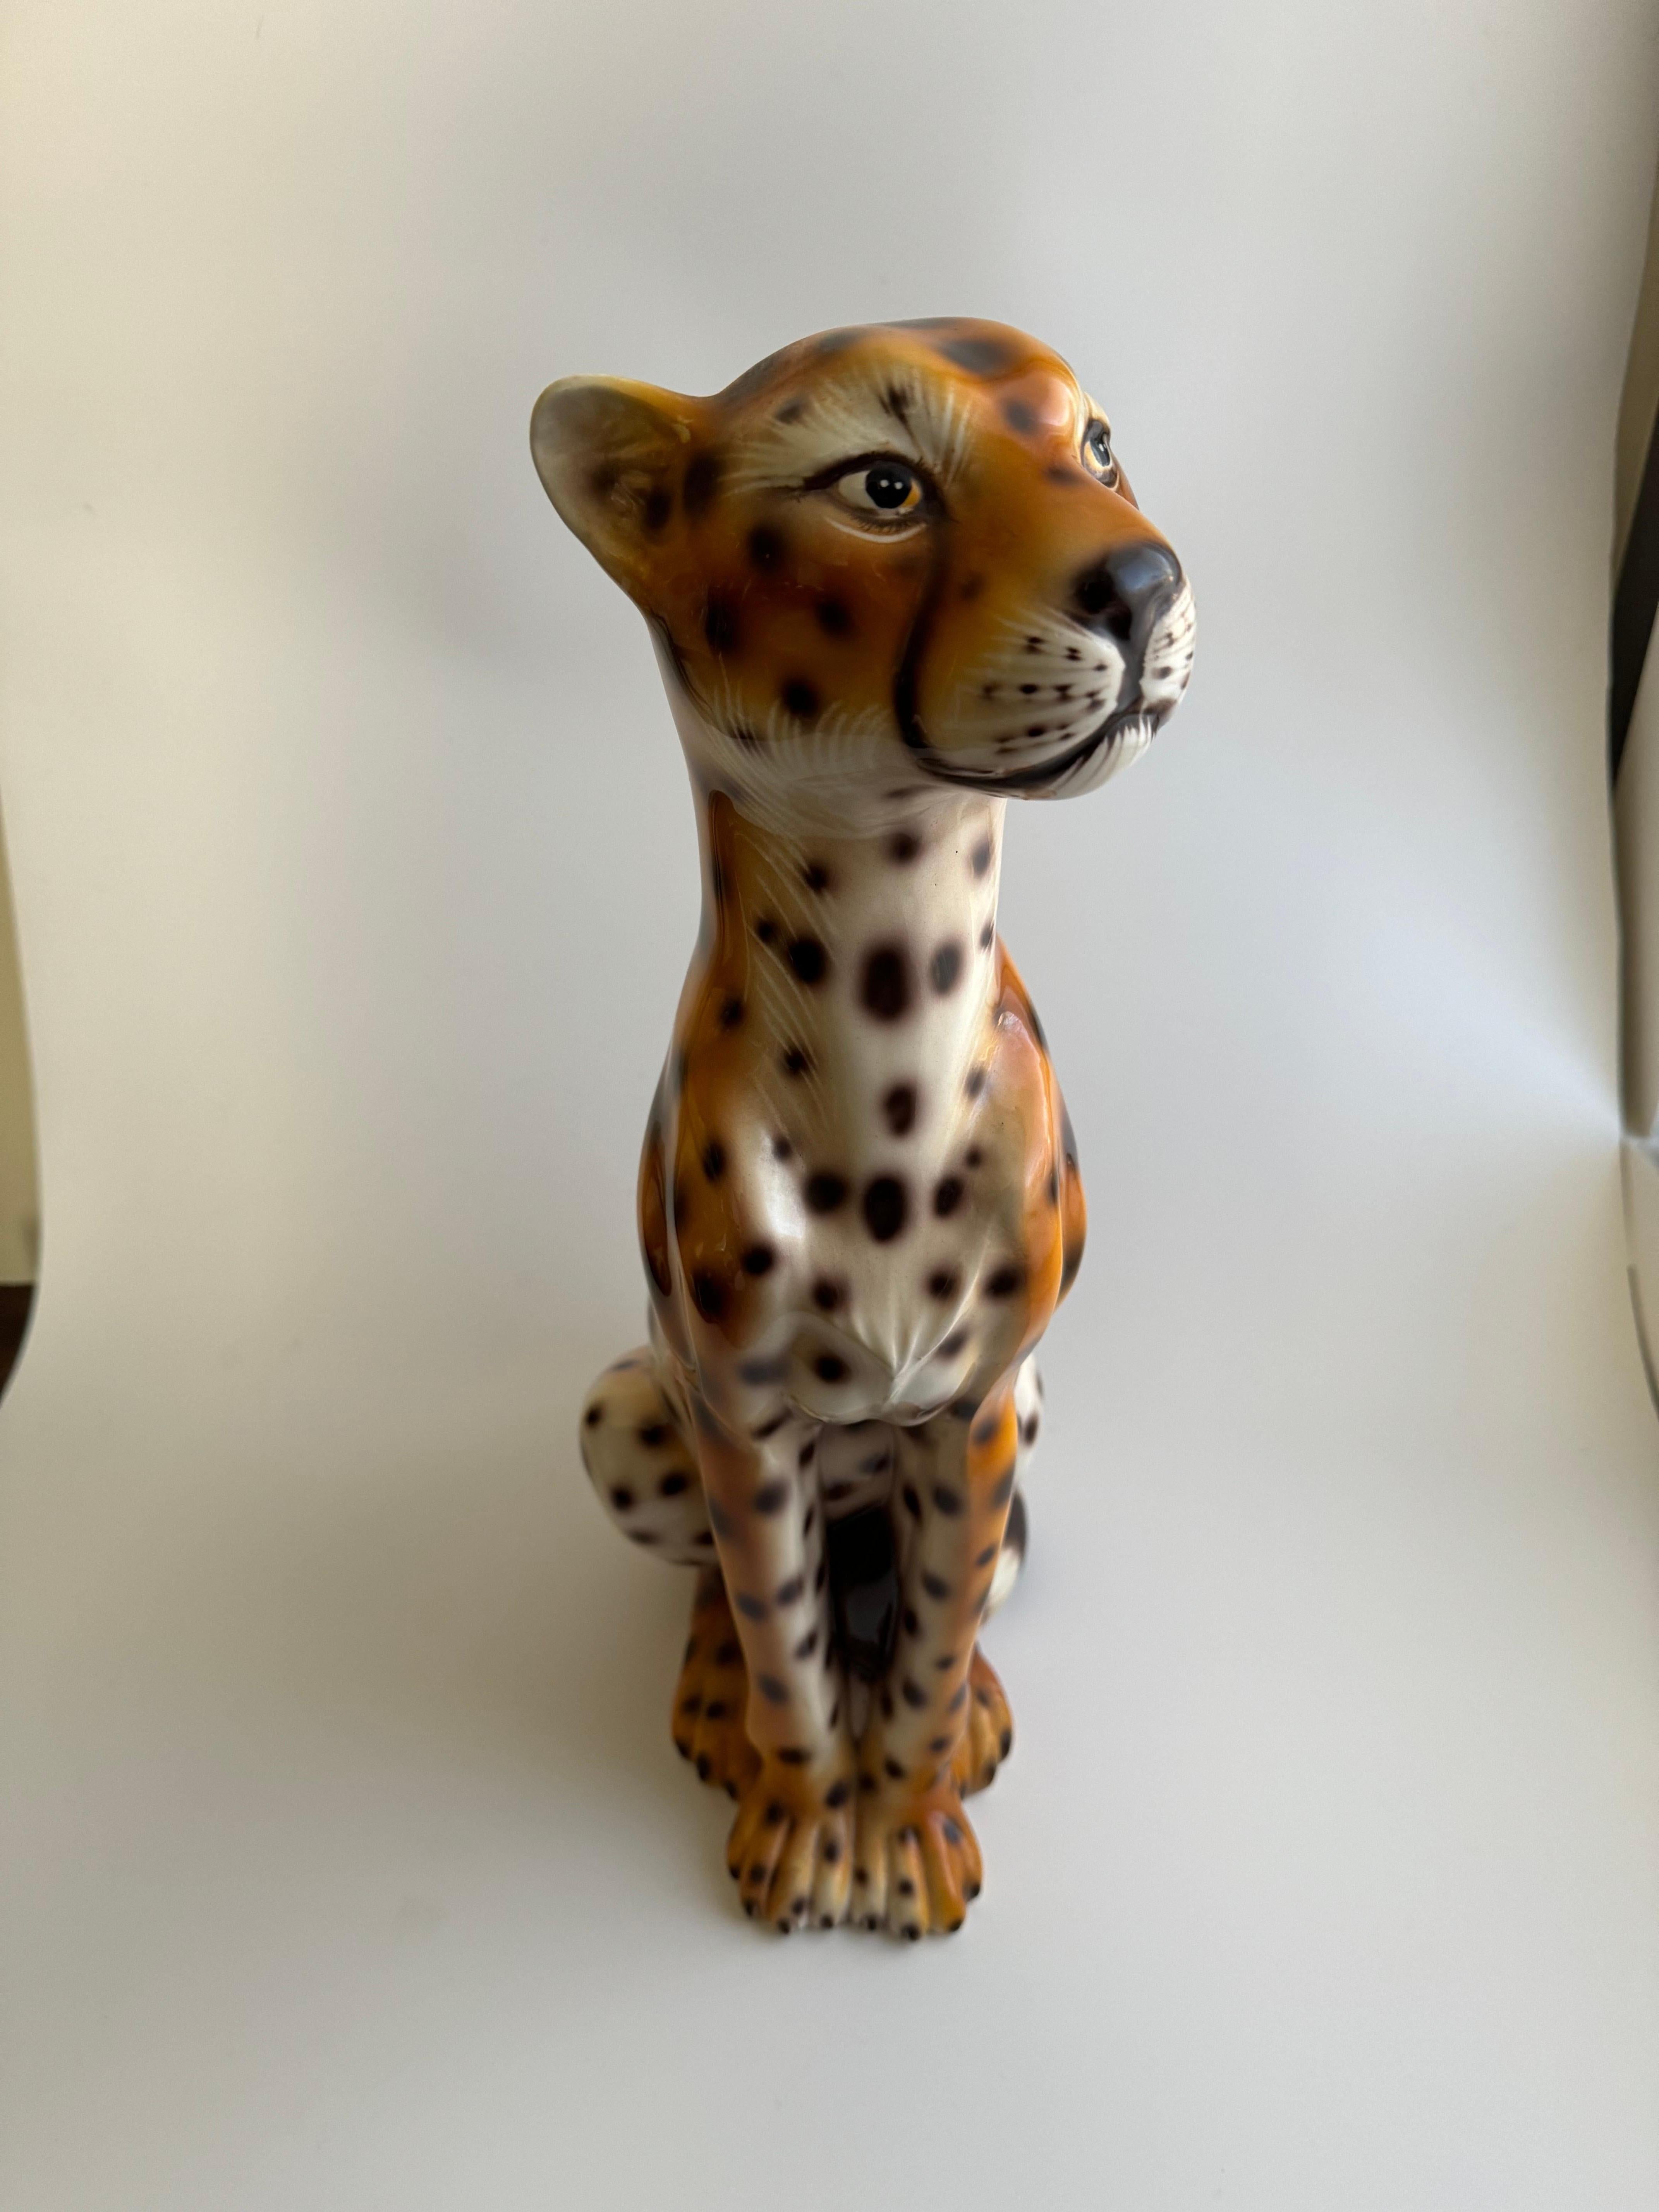 Vintage Italian porcelain leopard statue.The craftsmanship highlights the leopard’s spotted coat and muscular build, capturing its essence in a stylized manner. Vintage Italian porcelain often reflects a high level of detail and artistry, which is